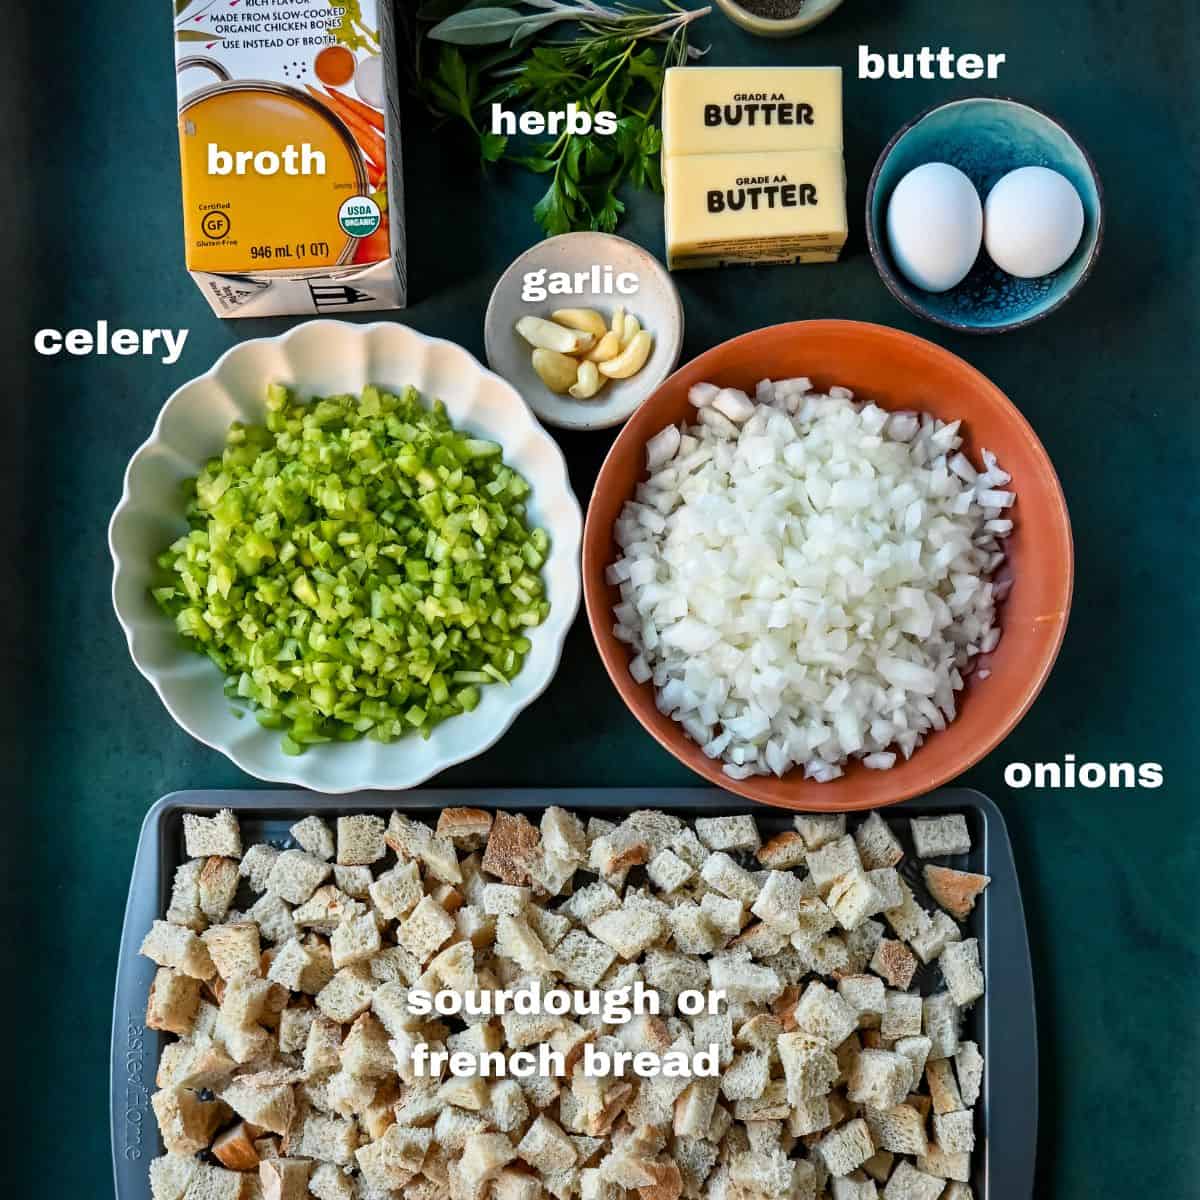 Classic Butter Herb Stuffing Ingredients. What ingredients to put in stuffing. How to make homemade stuffing.